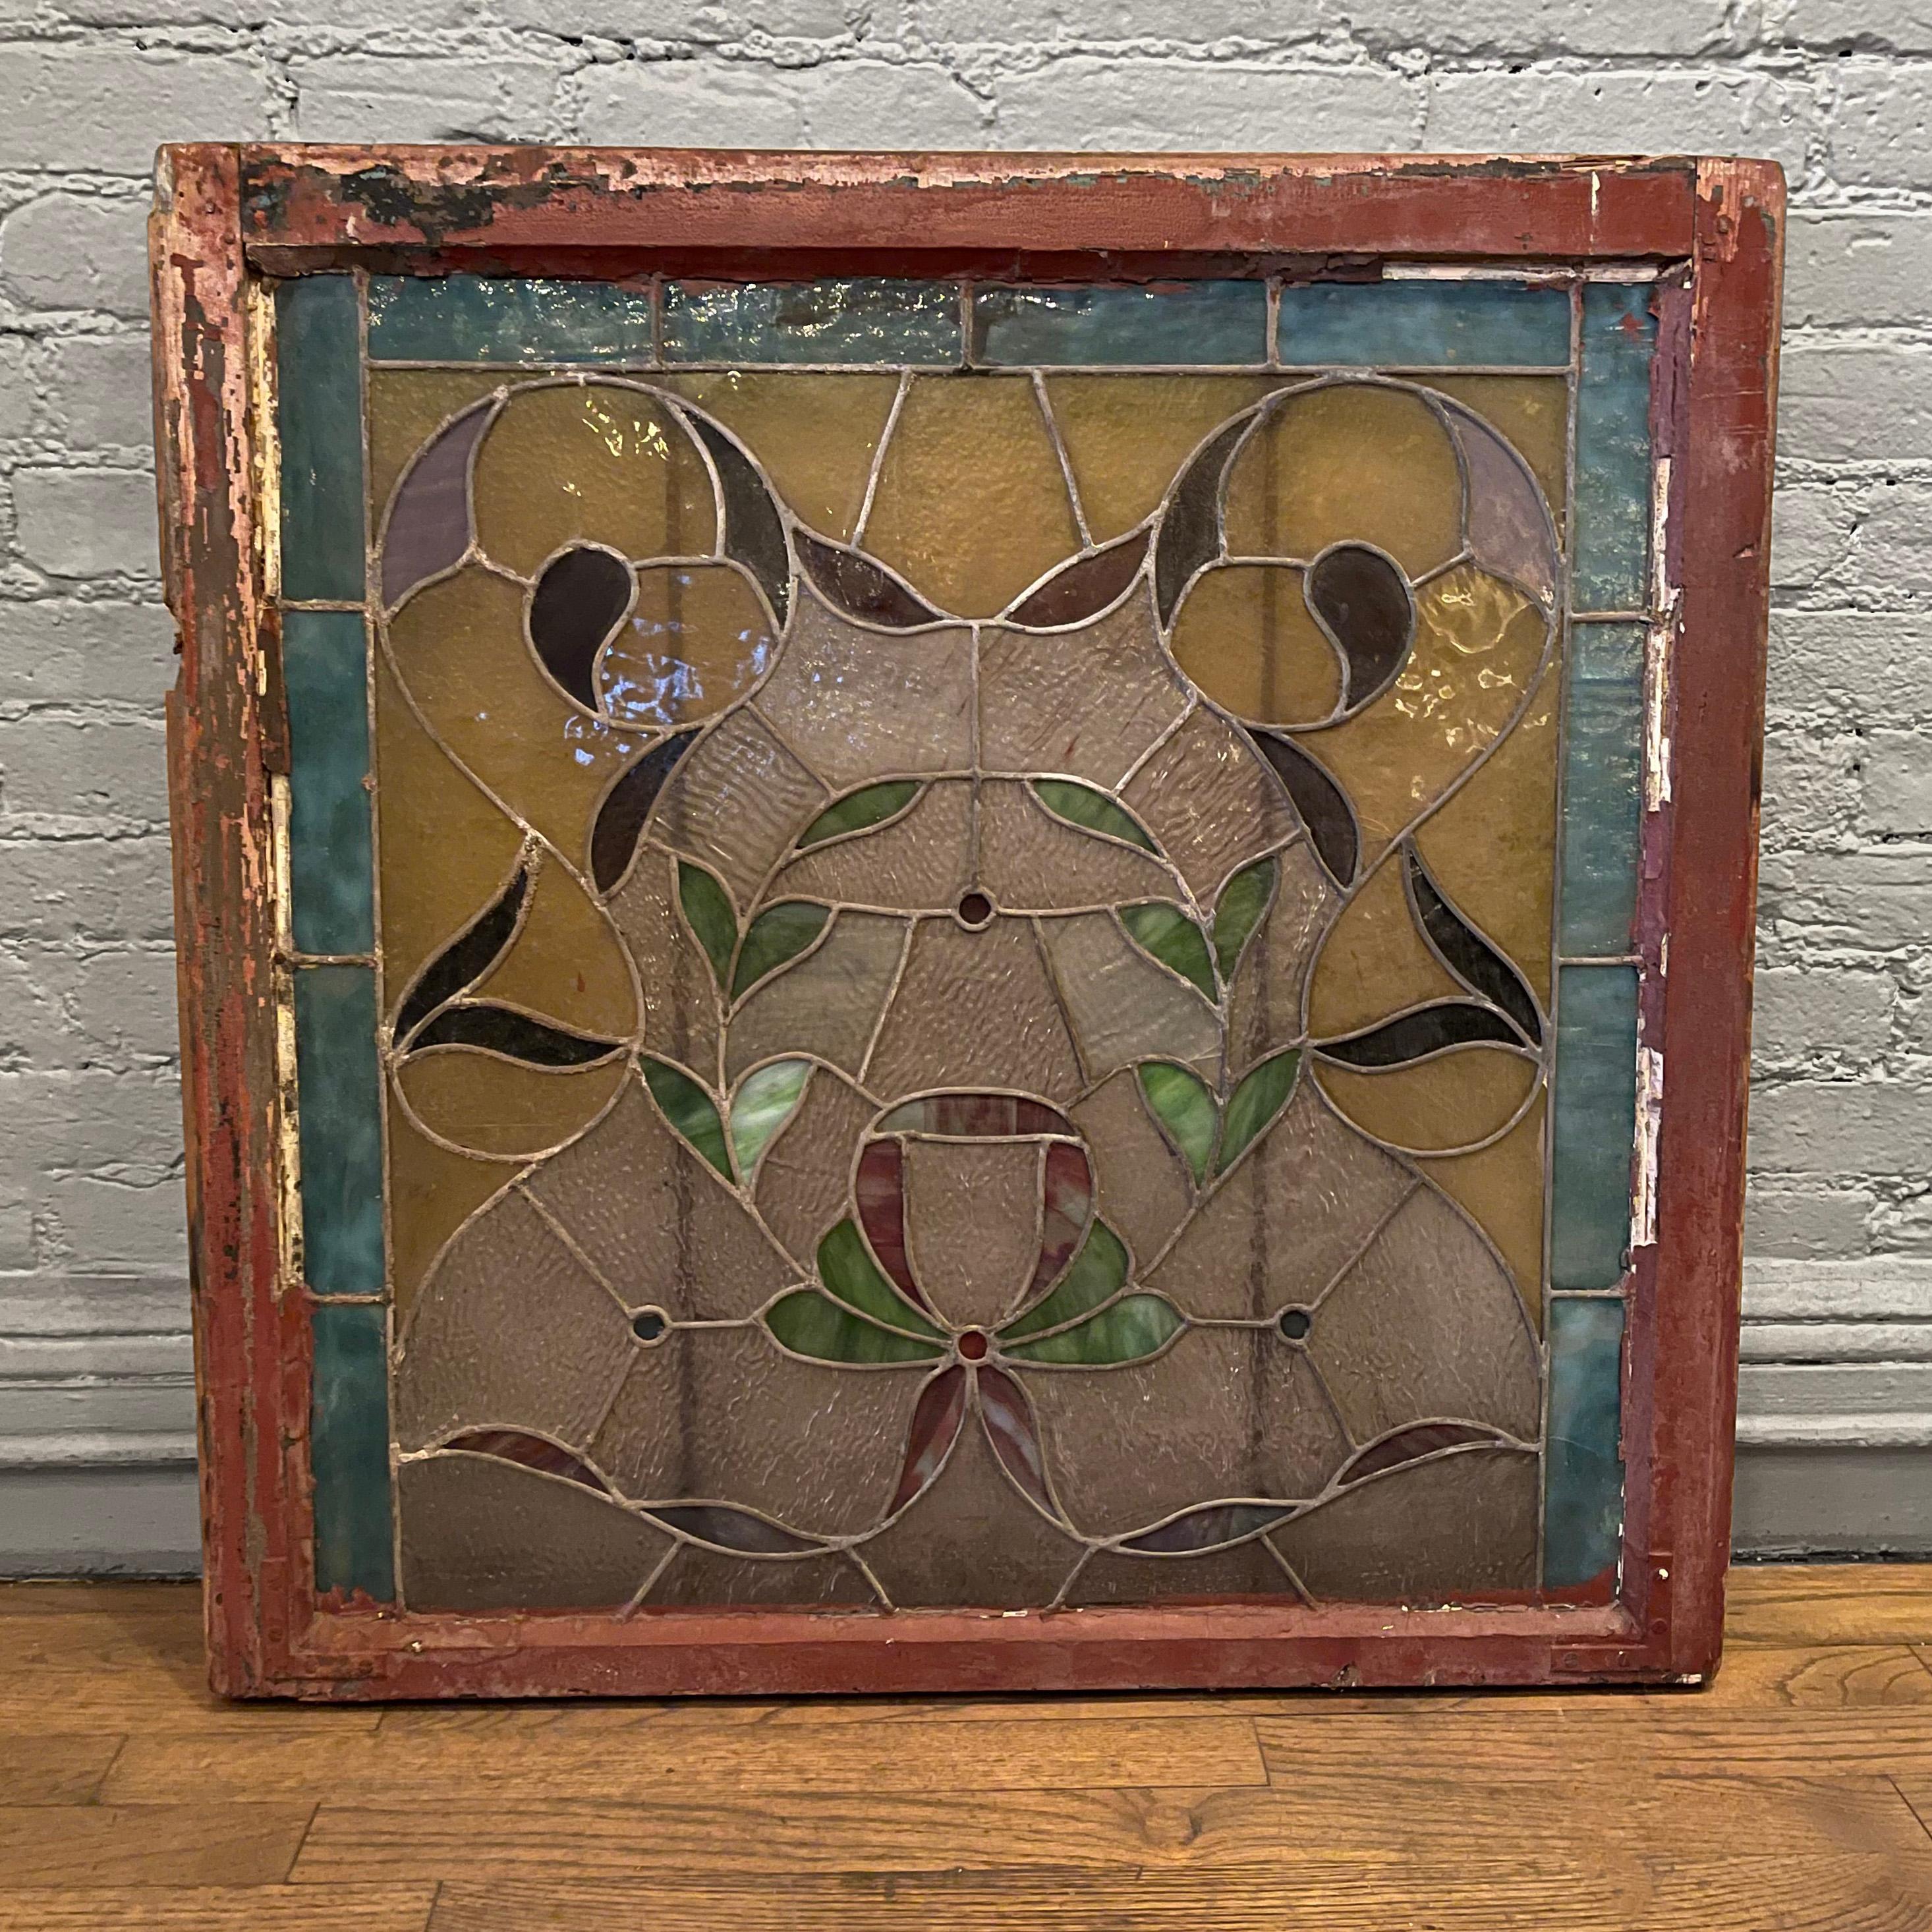 Arts & Crafts, lead-lined, stained glass window panel features a foliate wreath design with rustic painted wood frame.